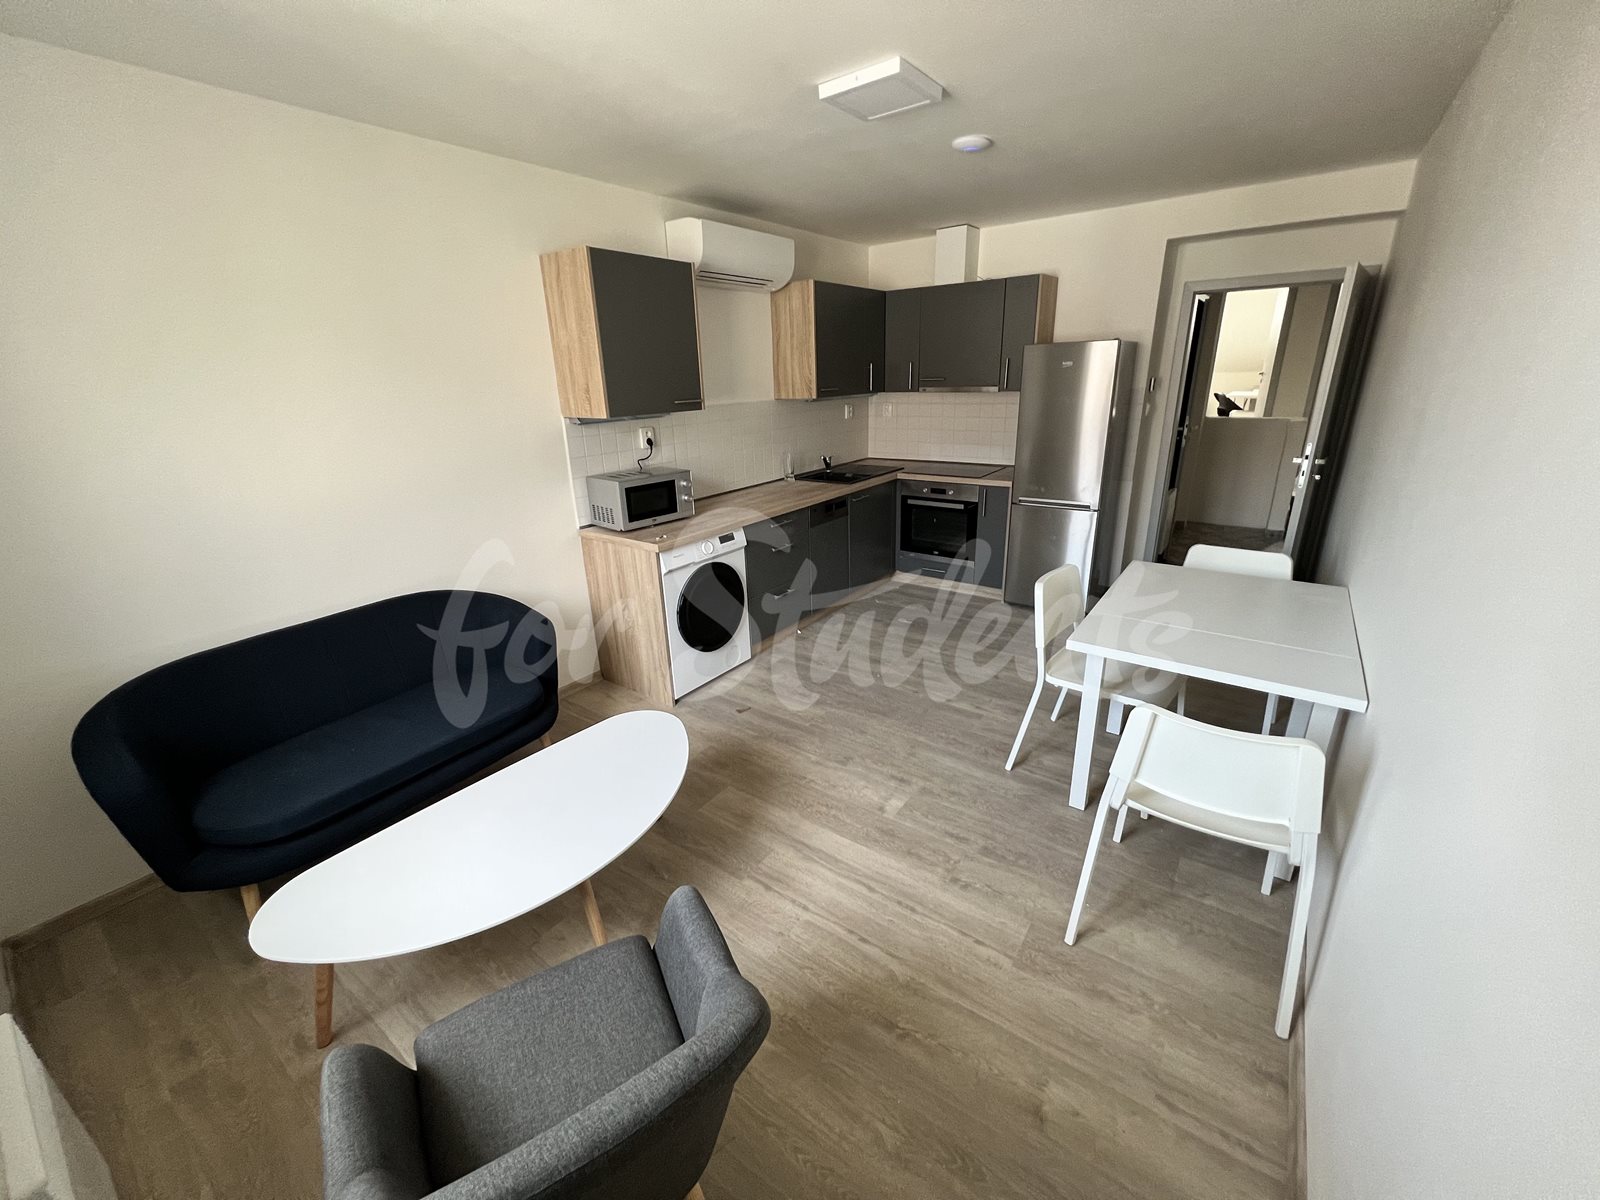 Brand new two bedroom apartment in New Town, Hradec Králové